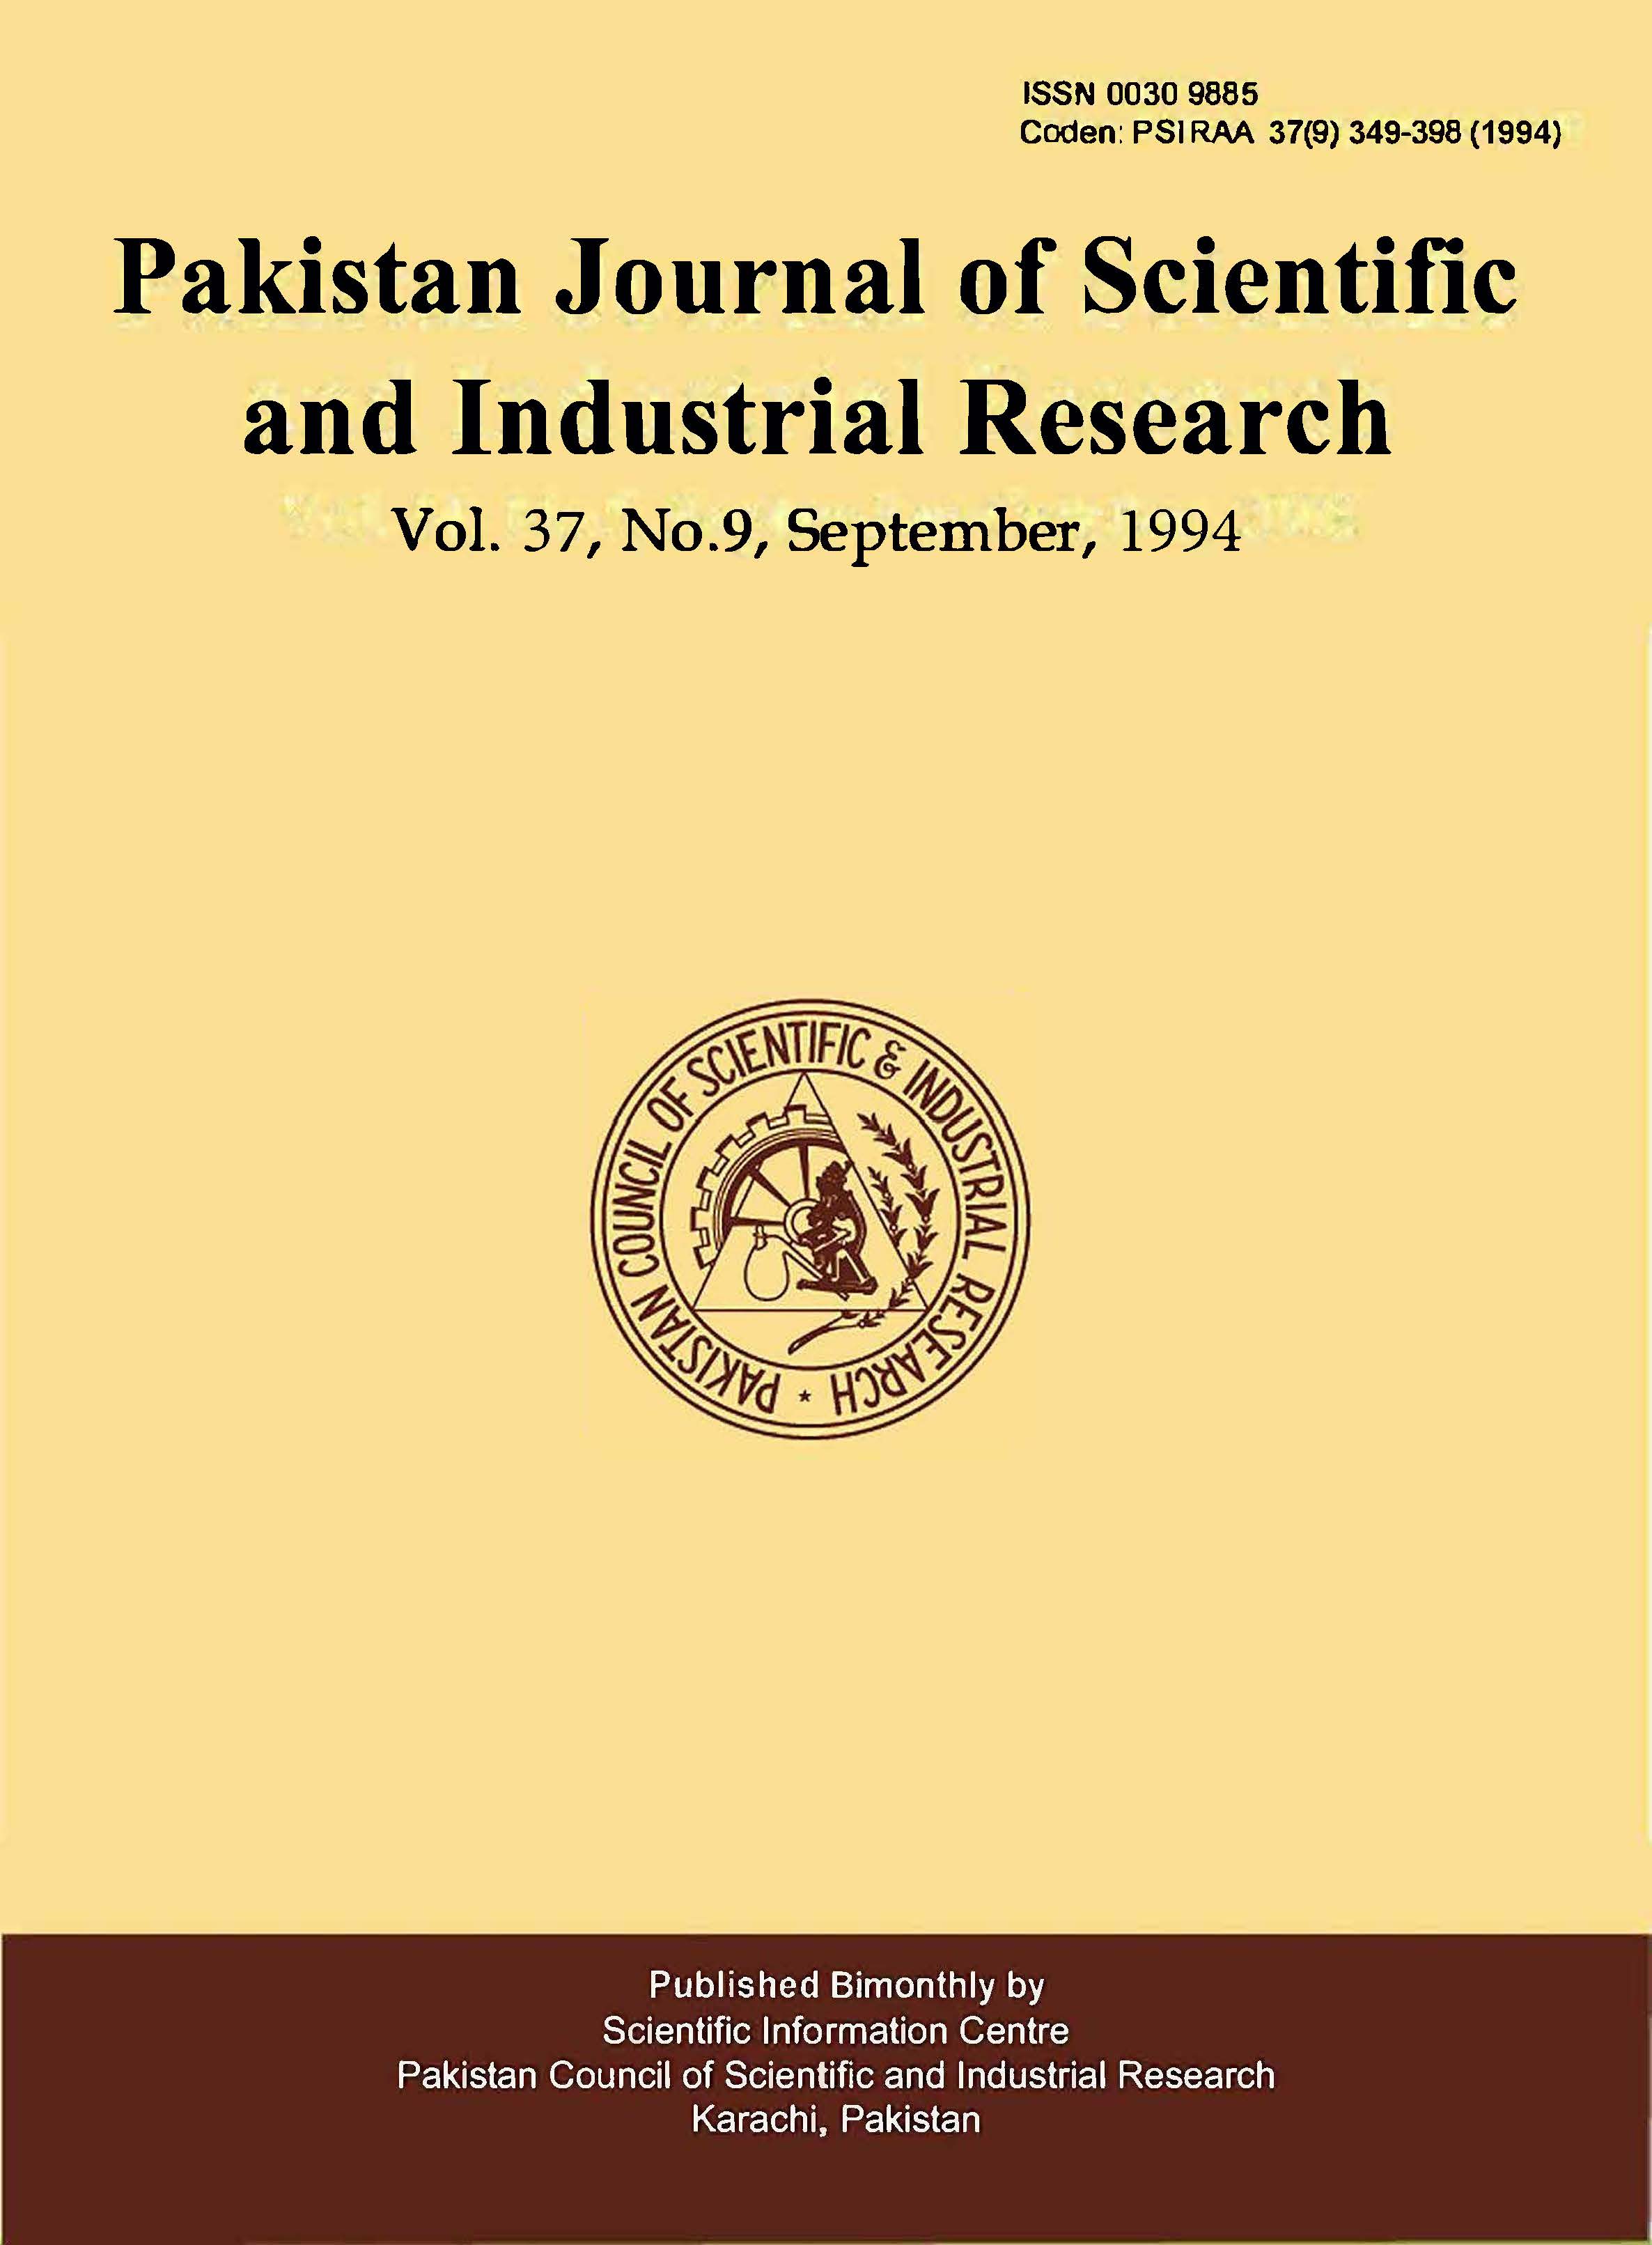 					View Vol. 37 No. 9 (1994): Pakistan Journal of Scientific and Industrial Research
				